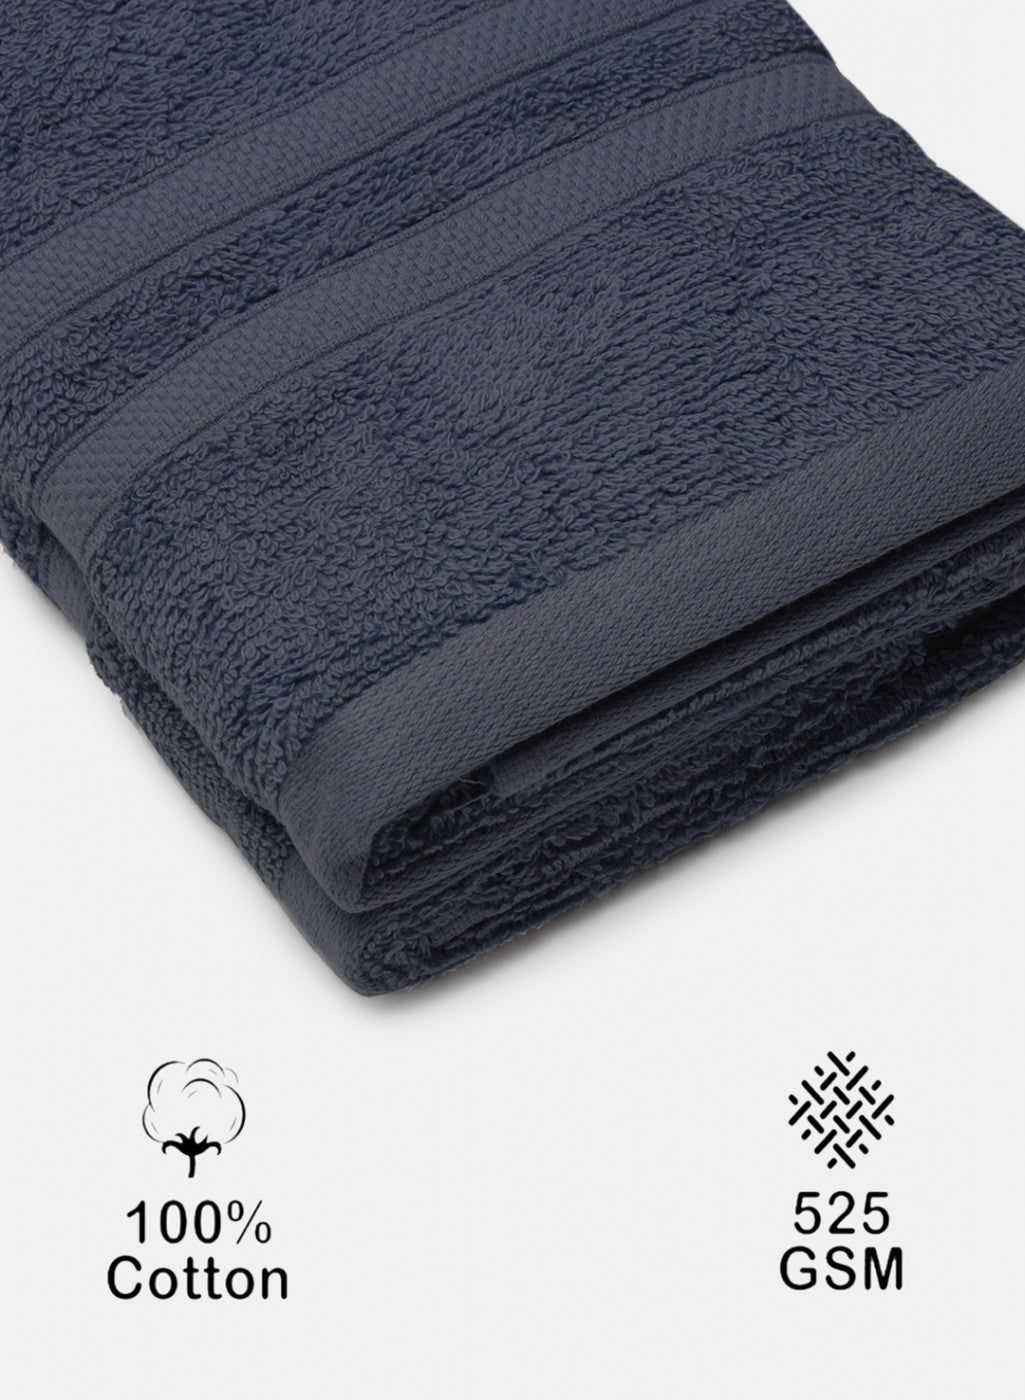 Navy Blue Cotton 525 GSM Hand Towels (Pack of 2)